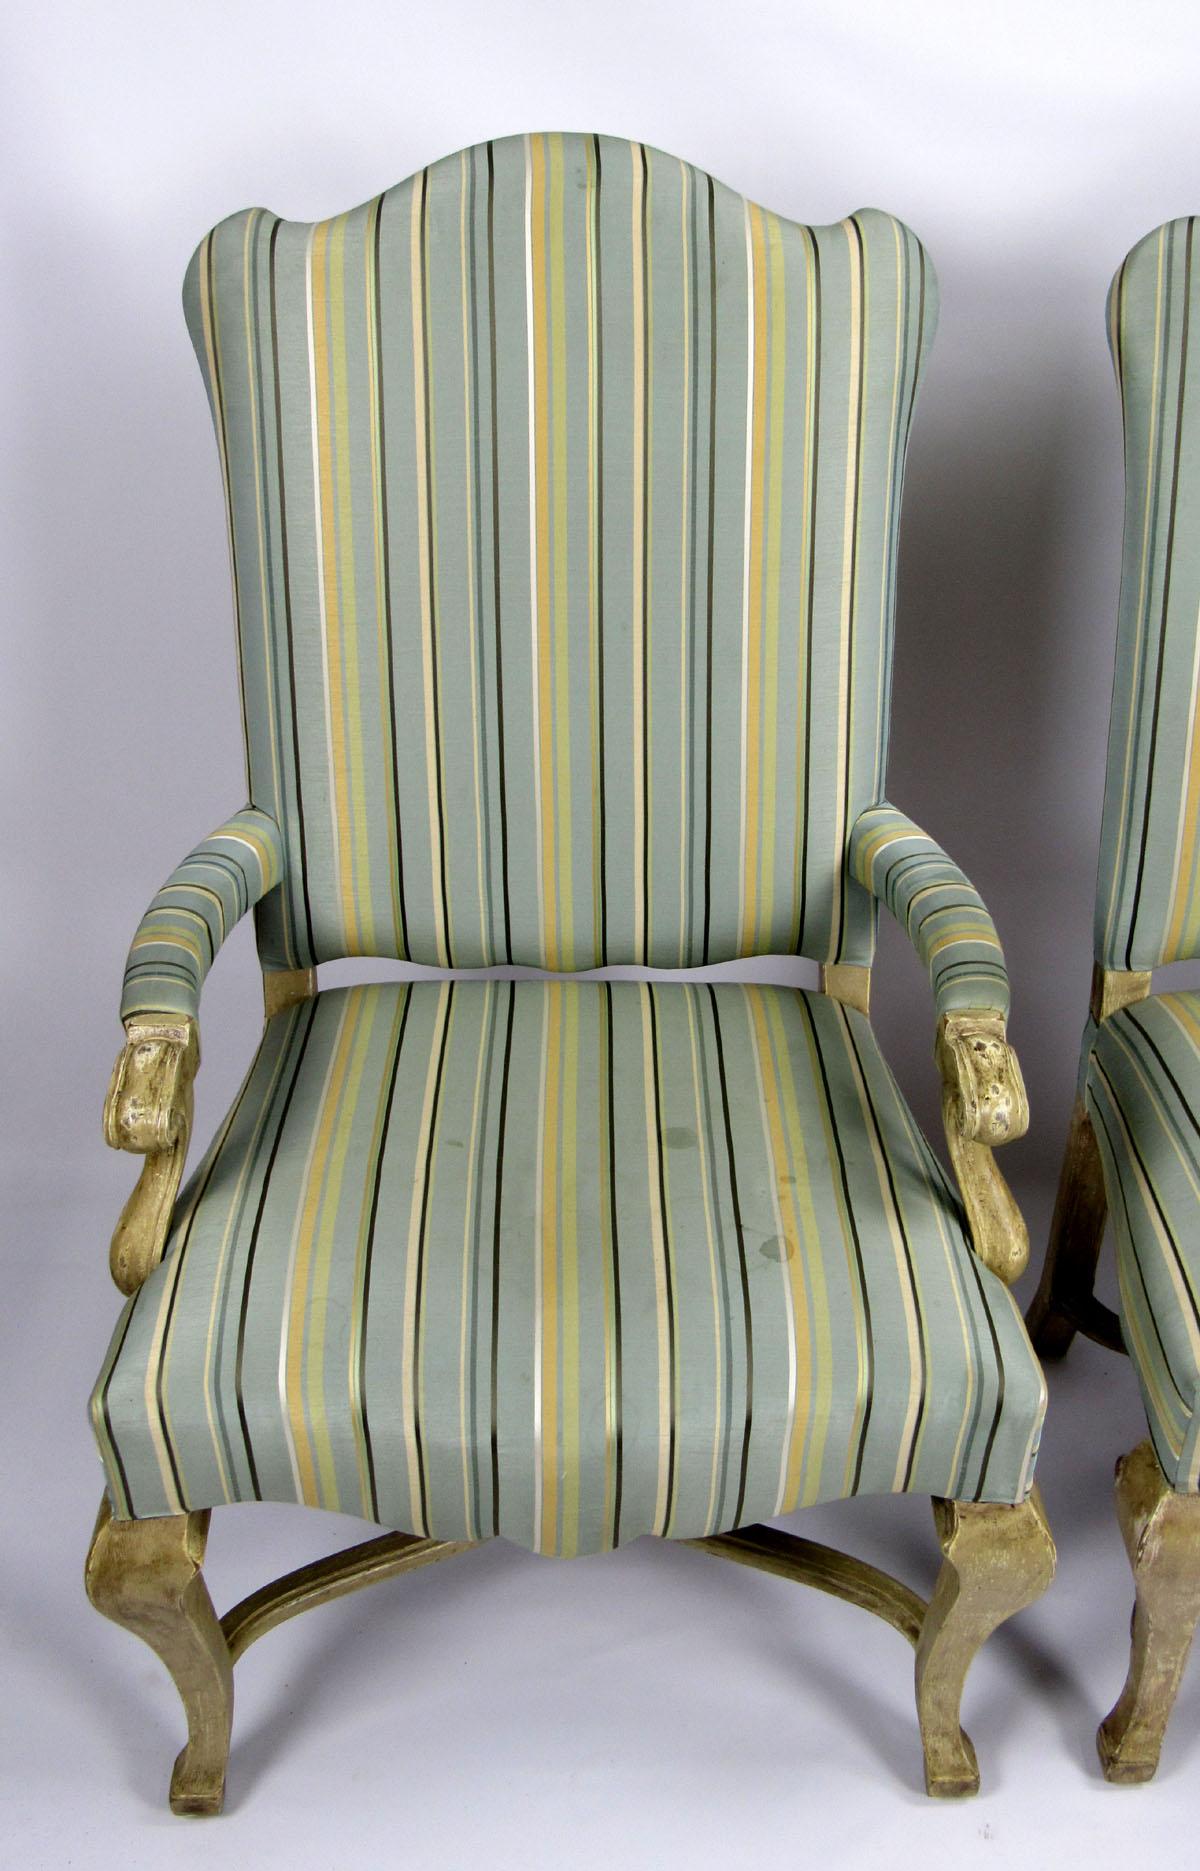 Near pair of 20th century chairs, one arm and one side, hand-carved with a light wood finish, upholstered in a pale blue and yellow striped fabric.

Side chair dimensions: 45½